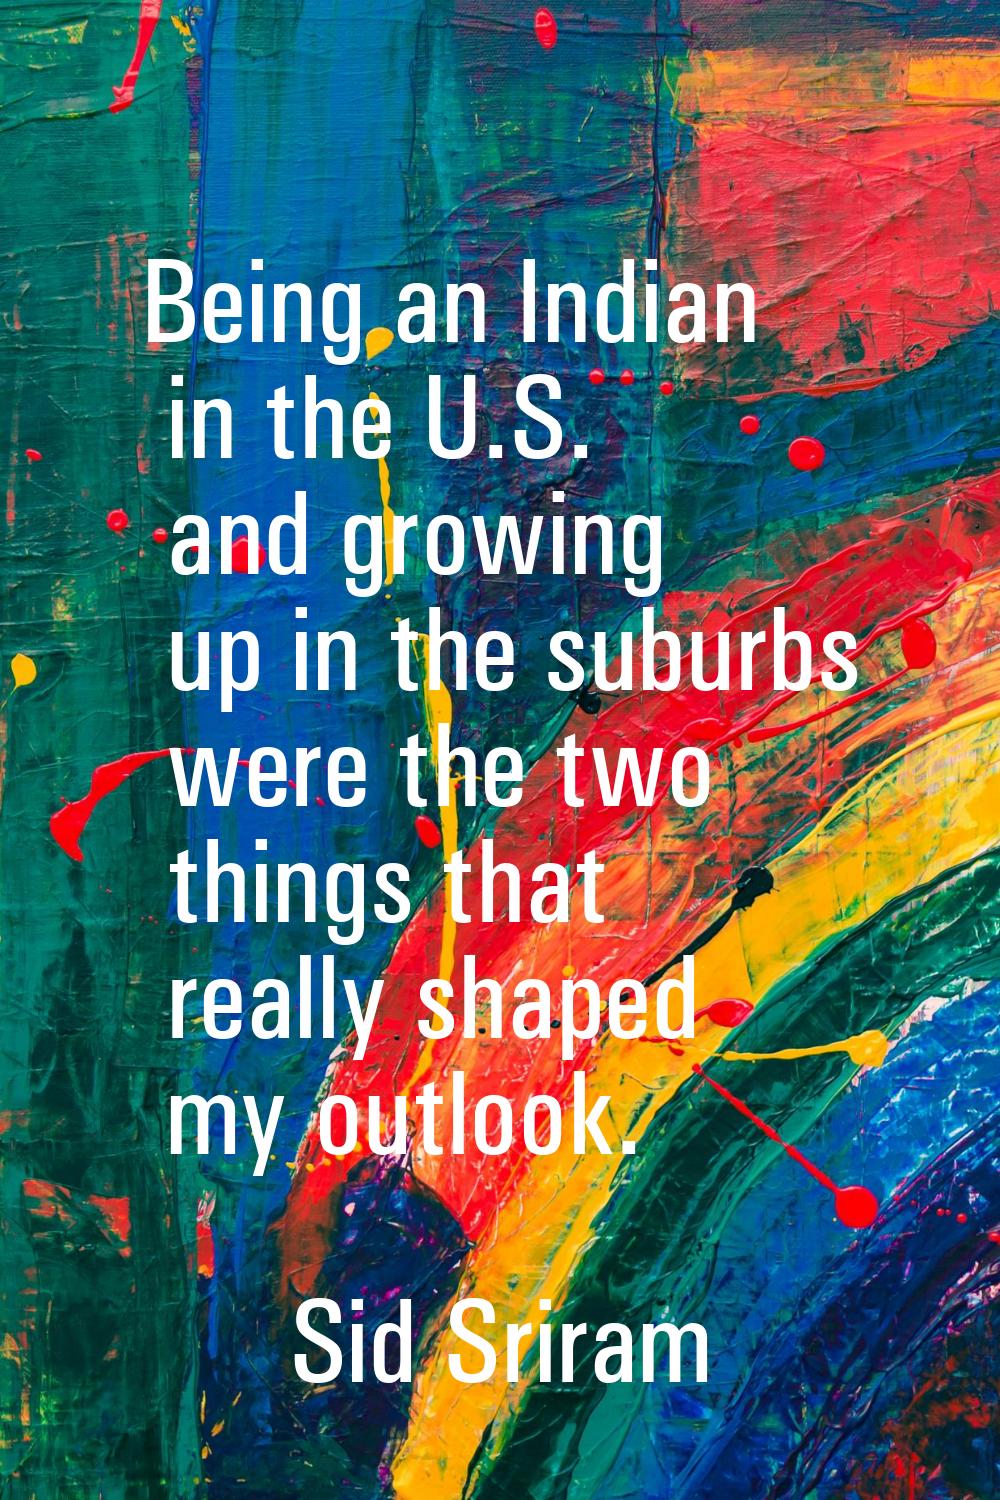 Being an Indian in the U.S. and growing up in the suburbs were the two things that really shaped my